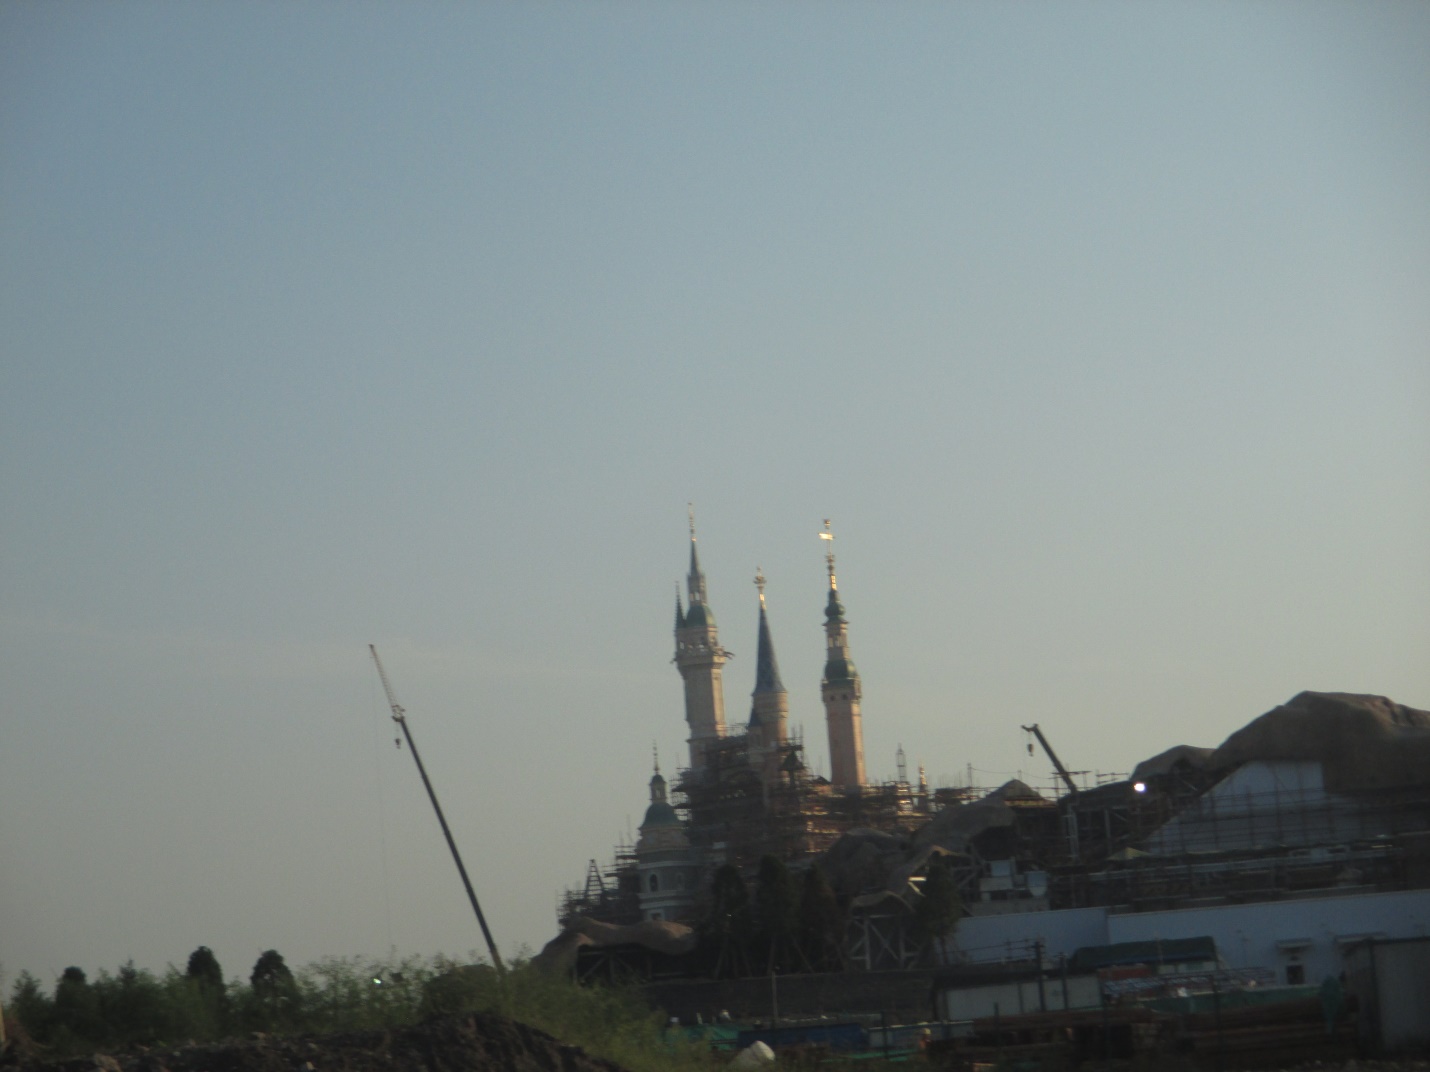 The big Disneyland castle being built in Shanghai, China.